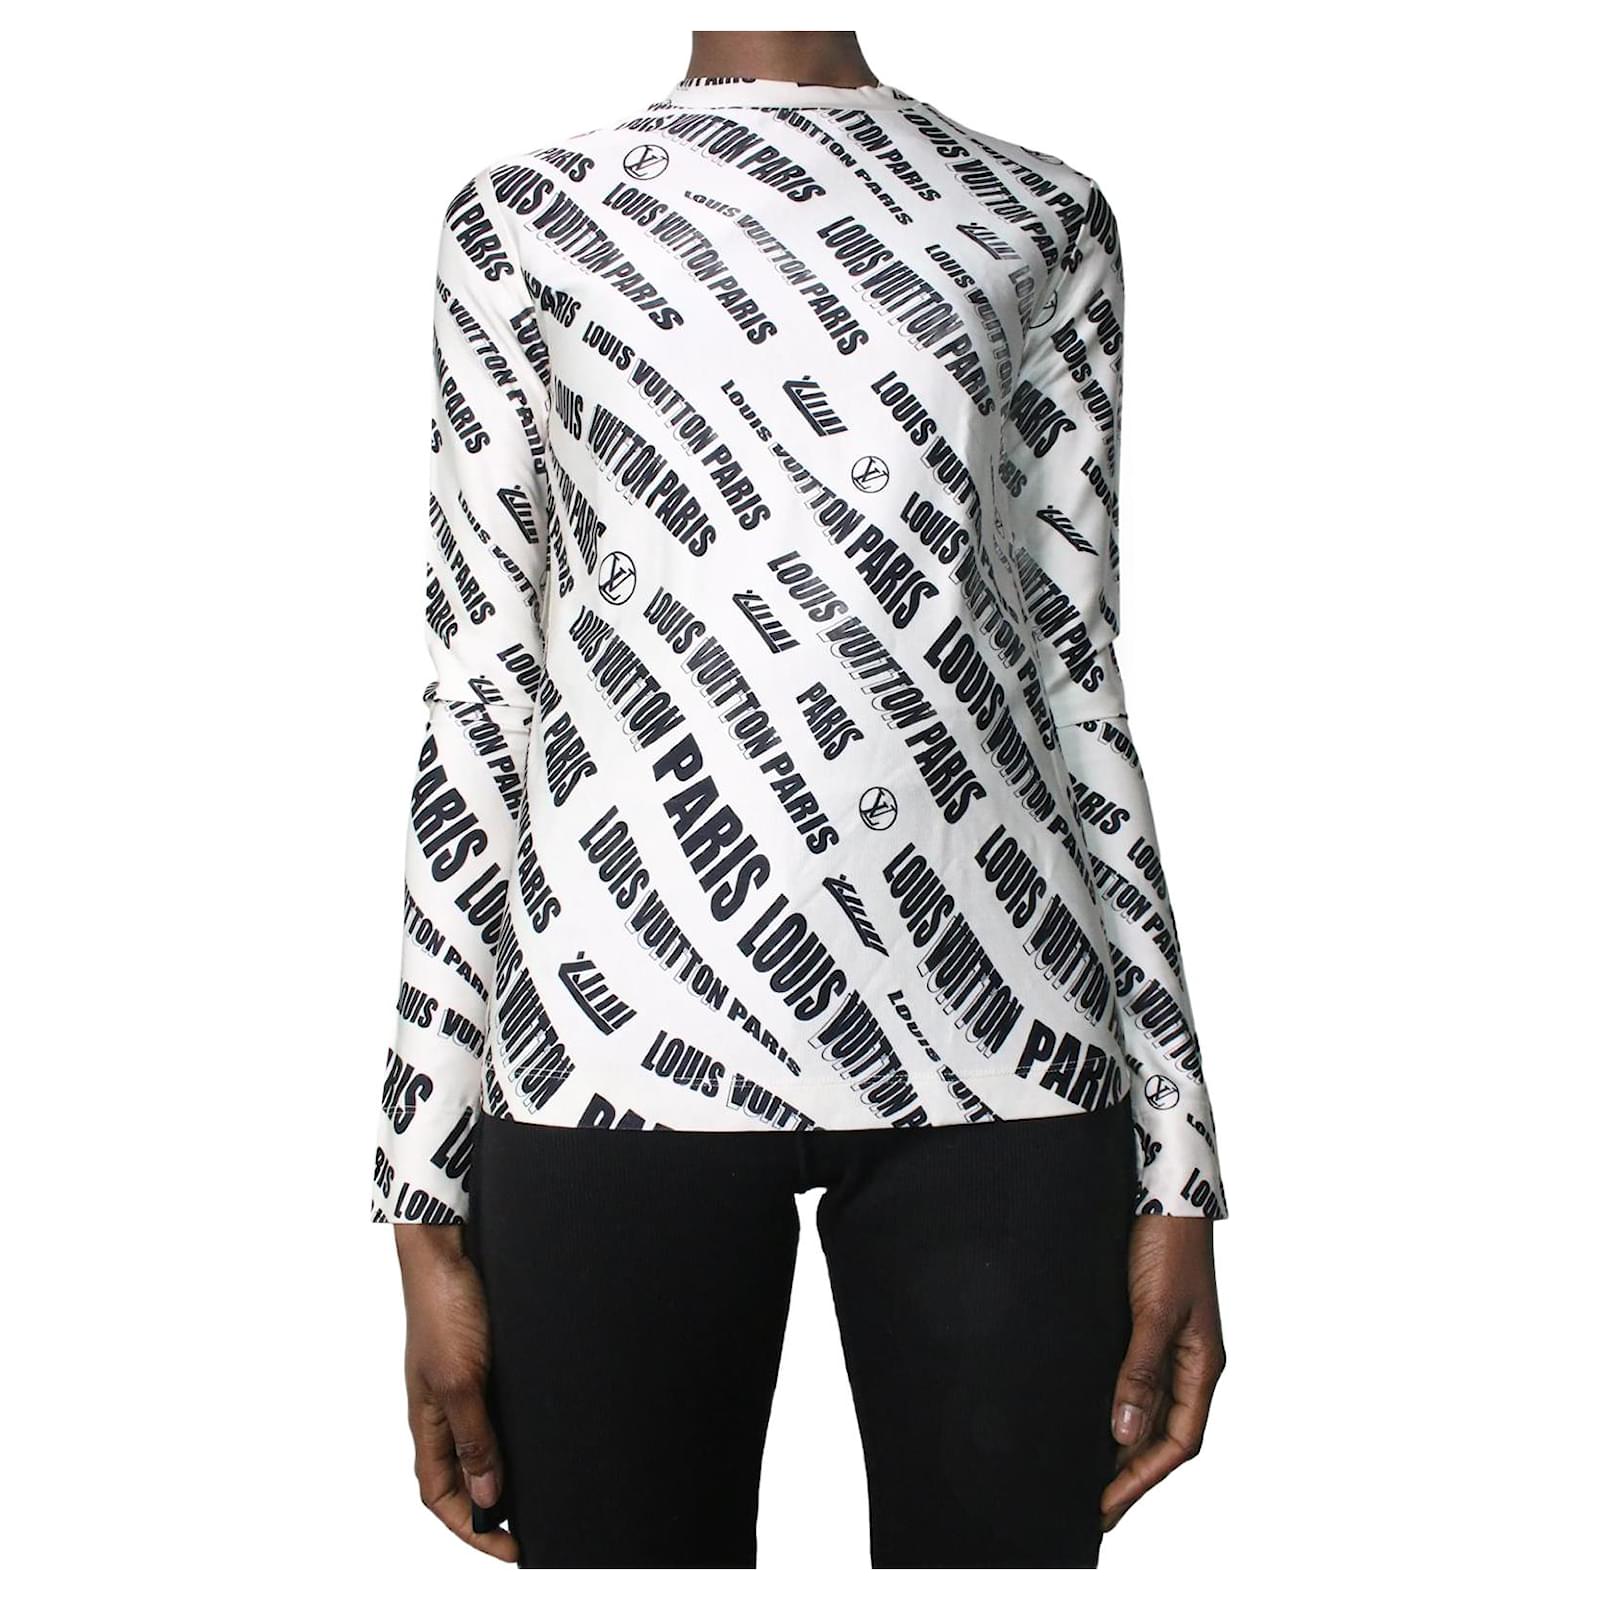 LOUIS VUITTON Long-Sleeved Graphic Shirt size S